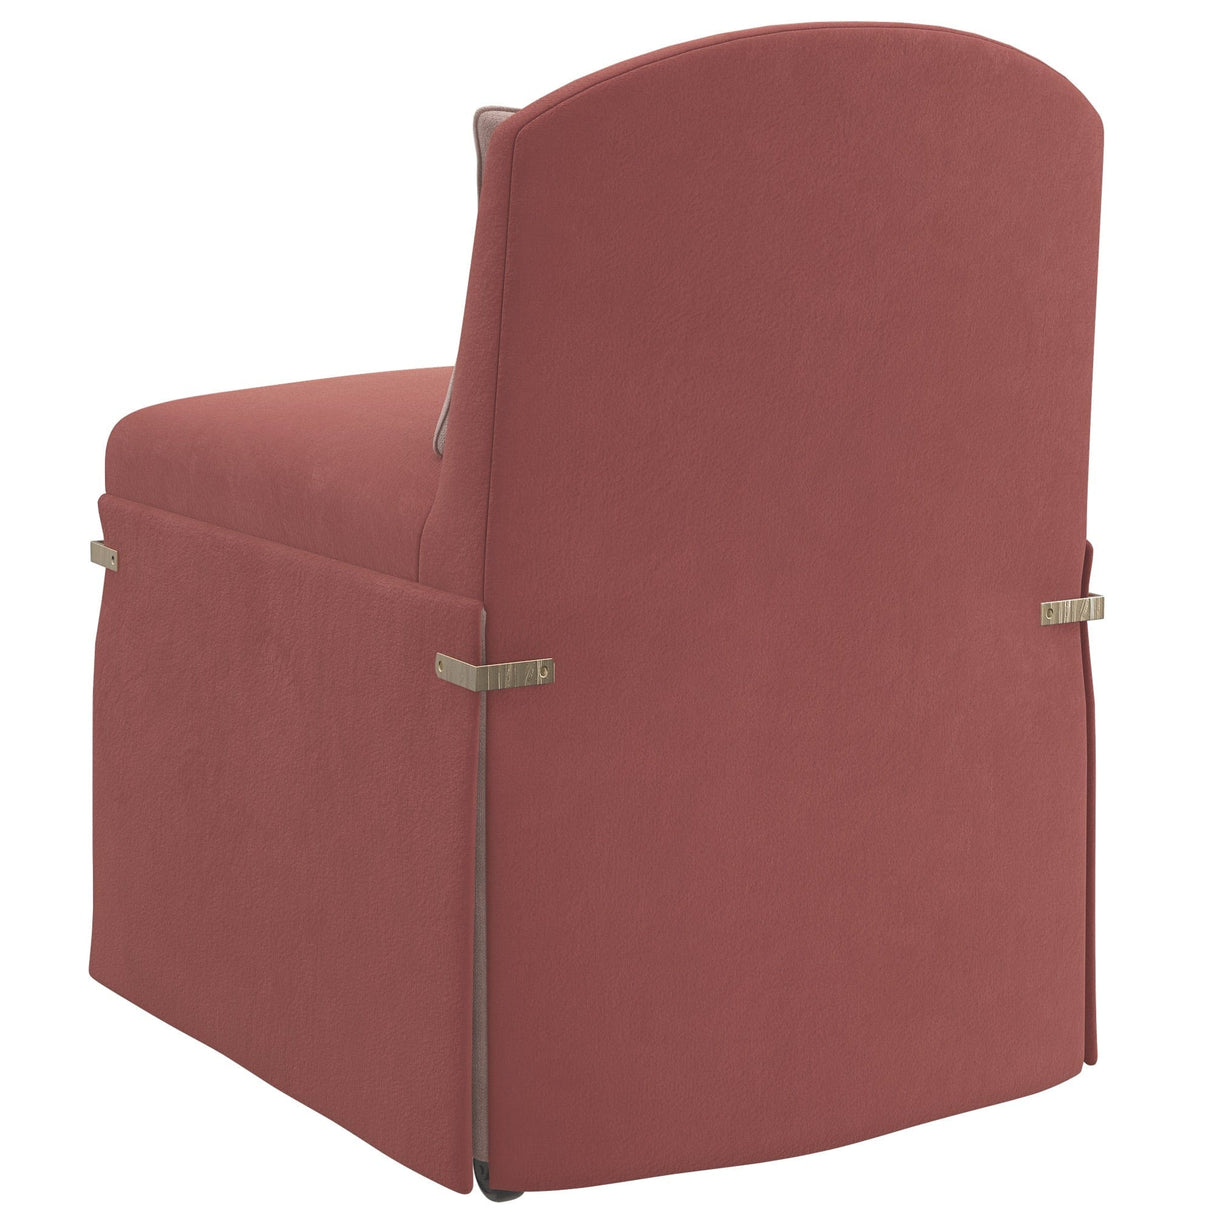 Caracole Bustle Chair Chairs caracole-UPH-022-293-A 662896047103